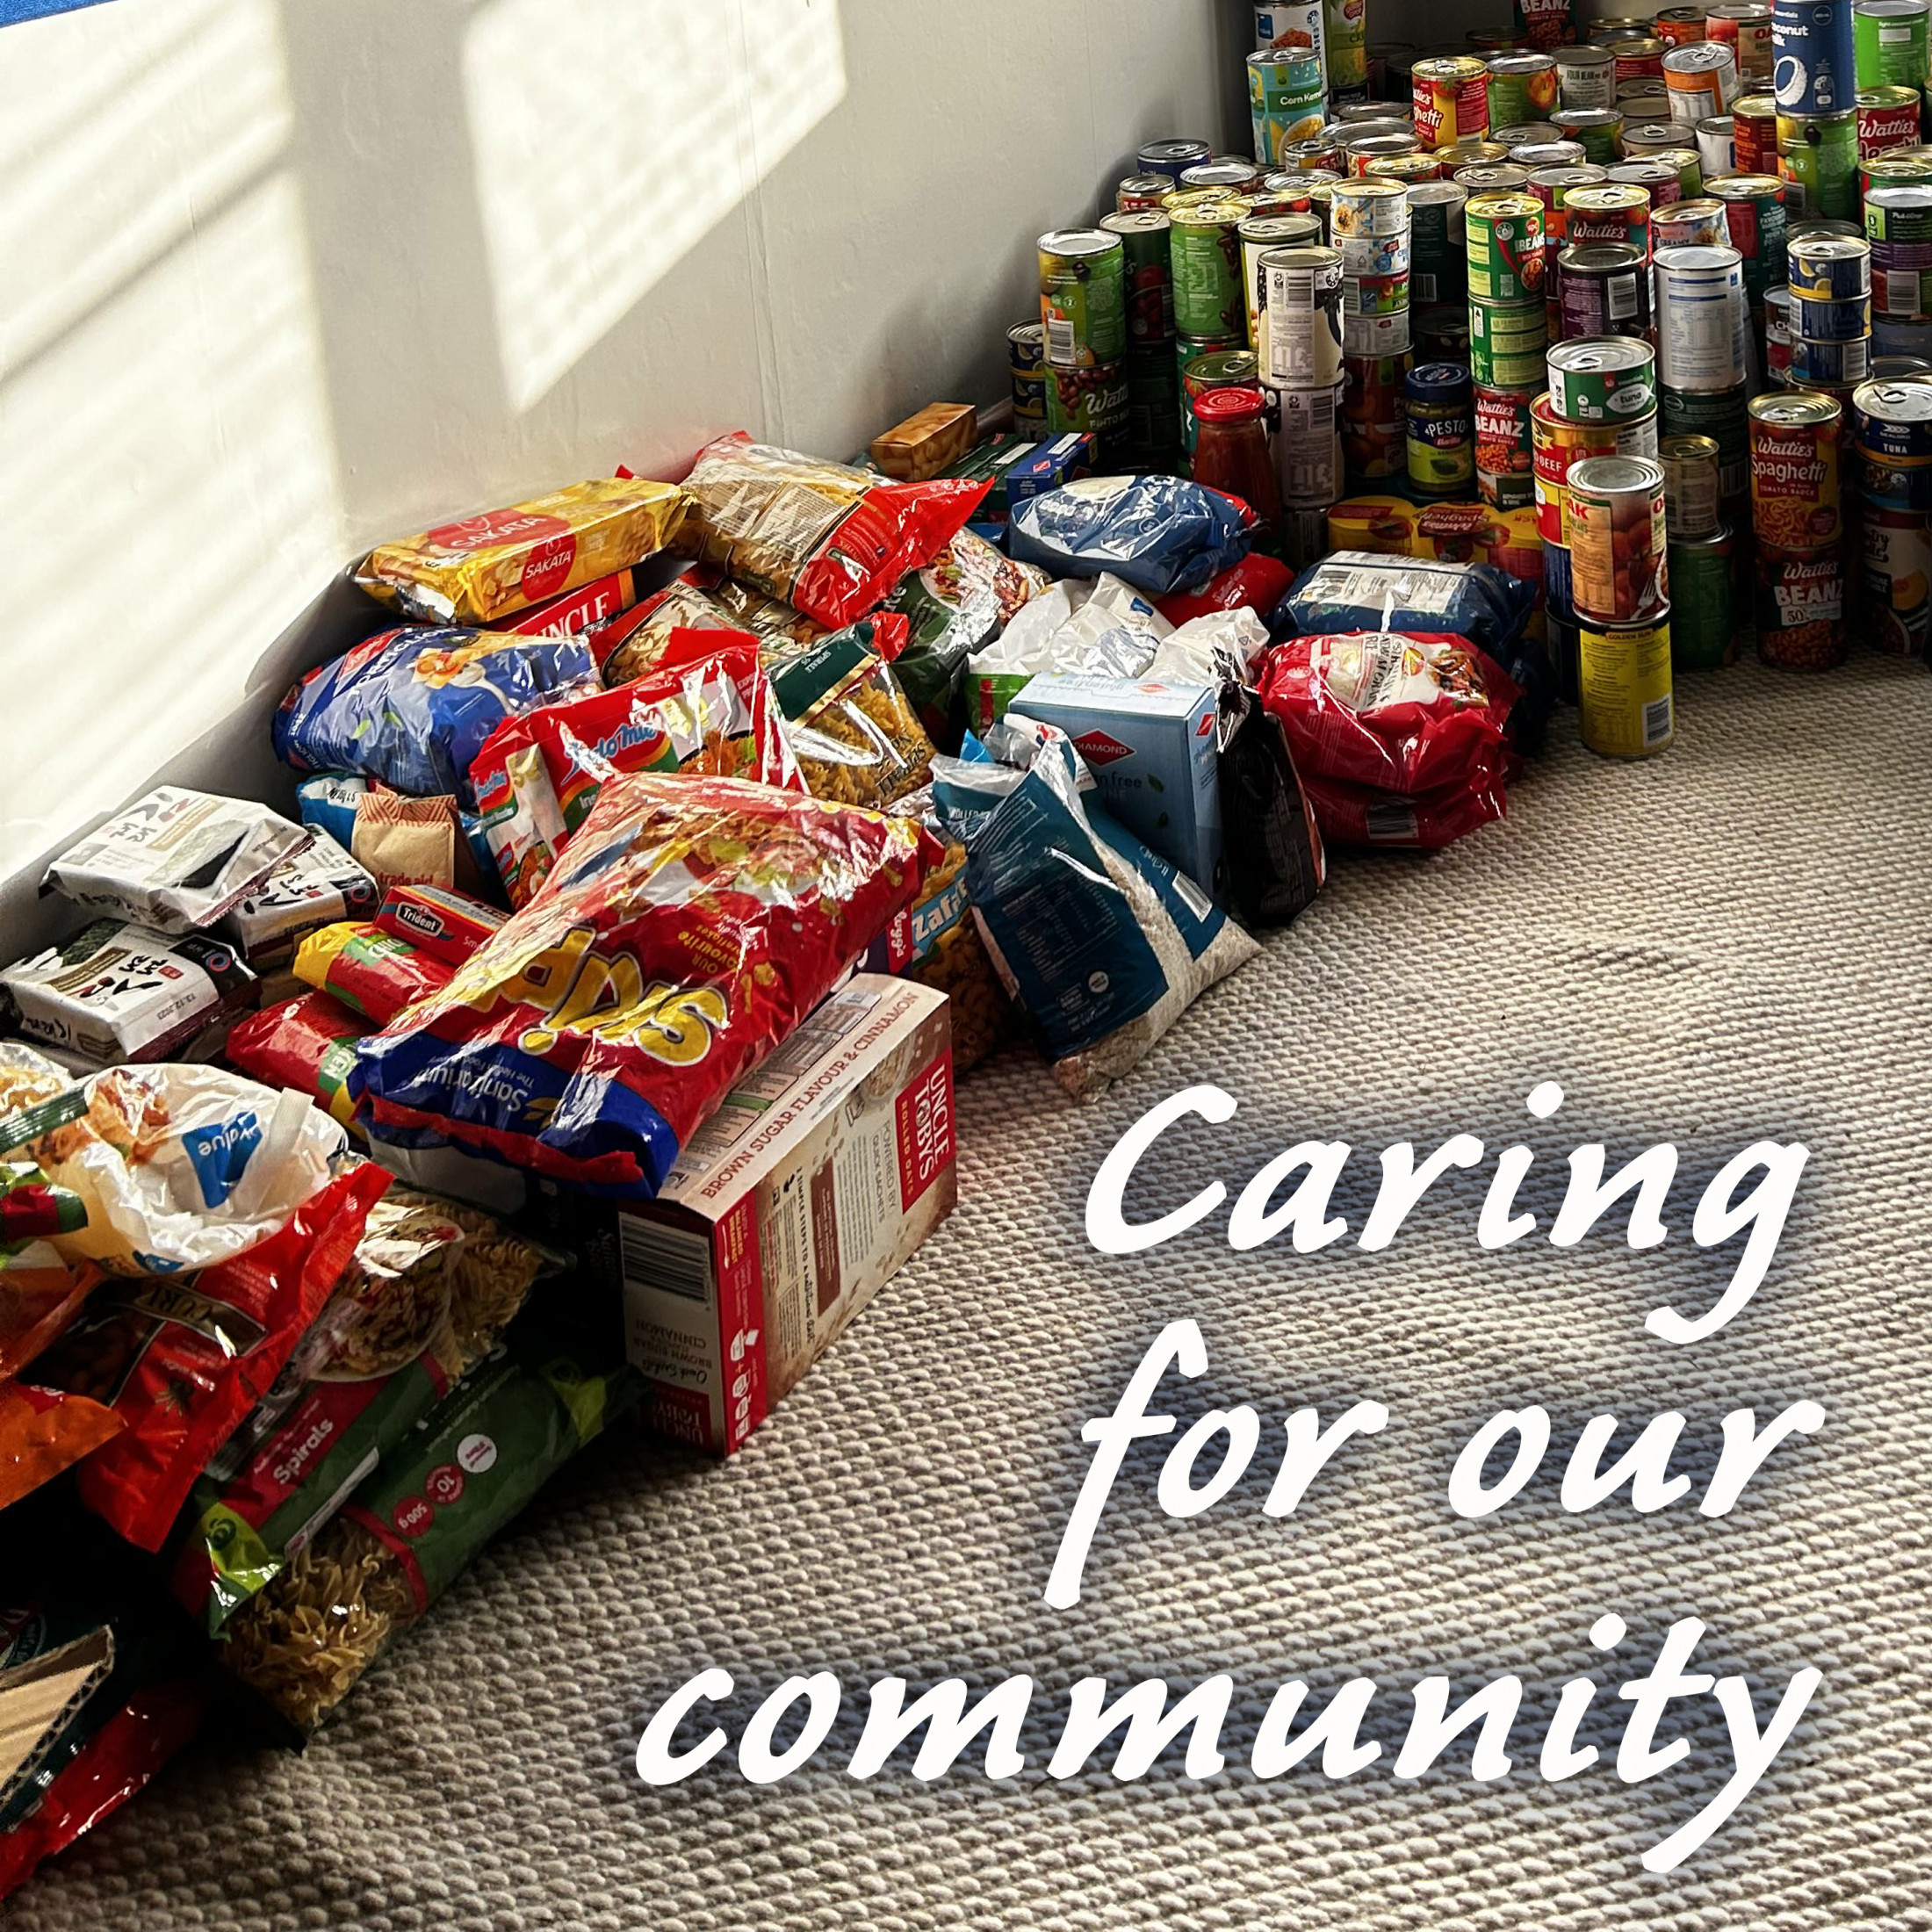 Donations to support our whānau in need